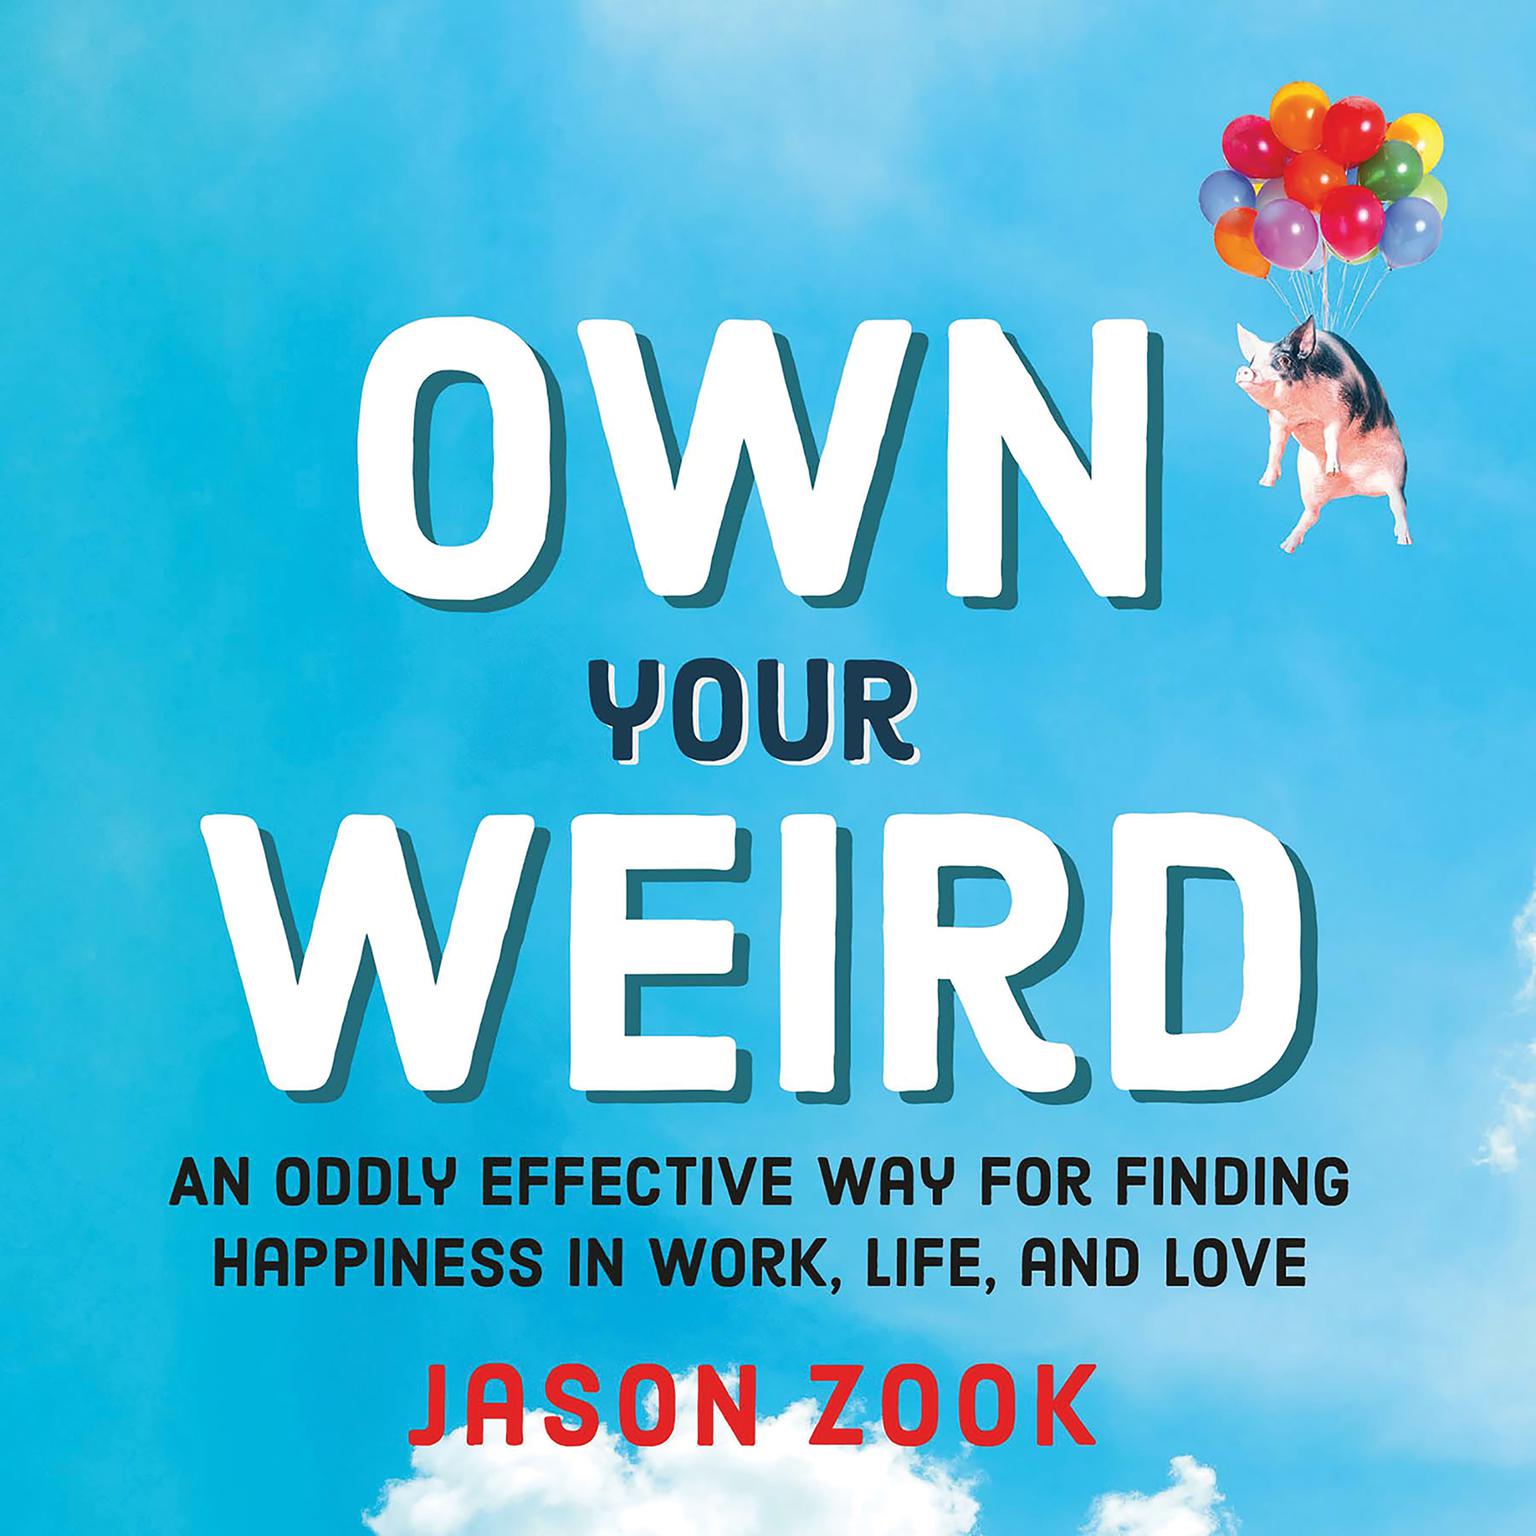 Own Your Weird: An Oddly Effective Way for Finding Happiness in Work, Life, and Love Audiobook, by Jason Zook